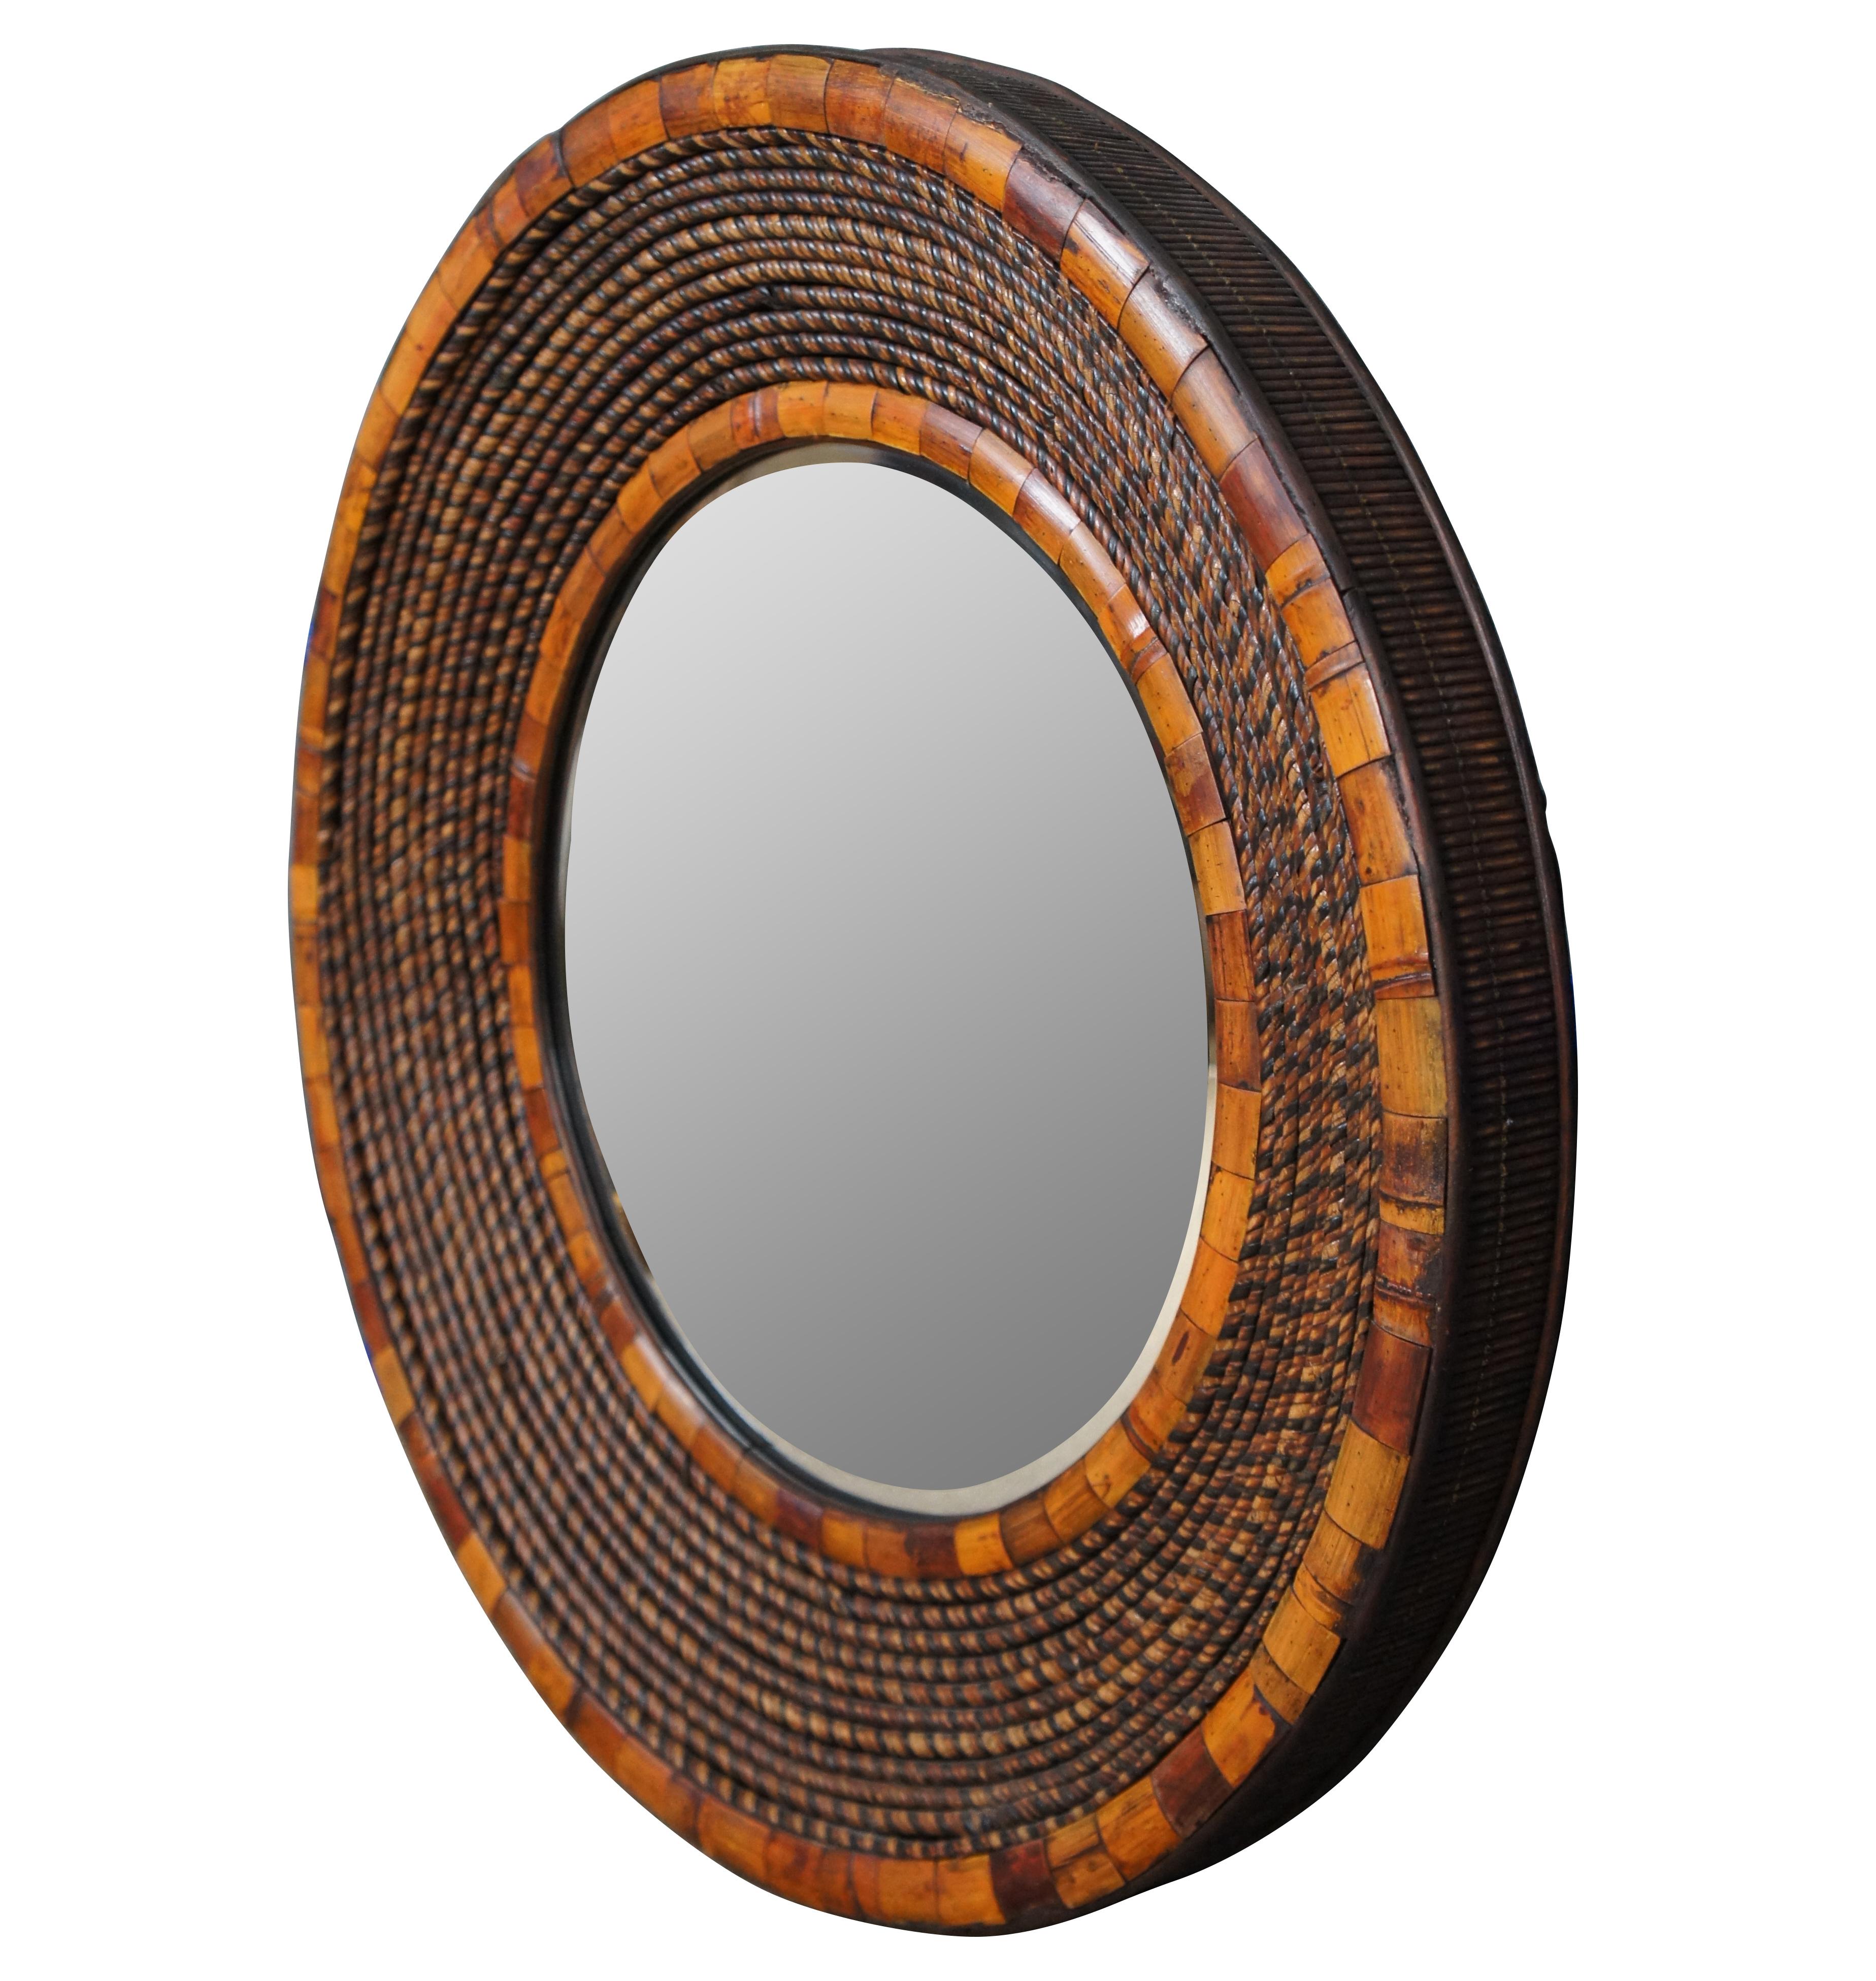 Round modern bullseye beveled wall vanity mirror framed with ropes of multi-toned twisted rattan / split reed wood, edged with rounded pieces of cut bamboo.

Provenance:
Estate of J. Frederic Gagel, owner of multiple Thoroughbred race horses that